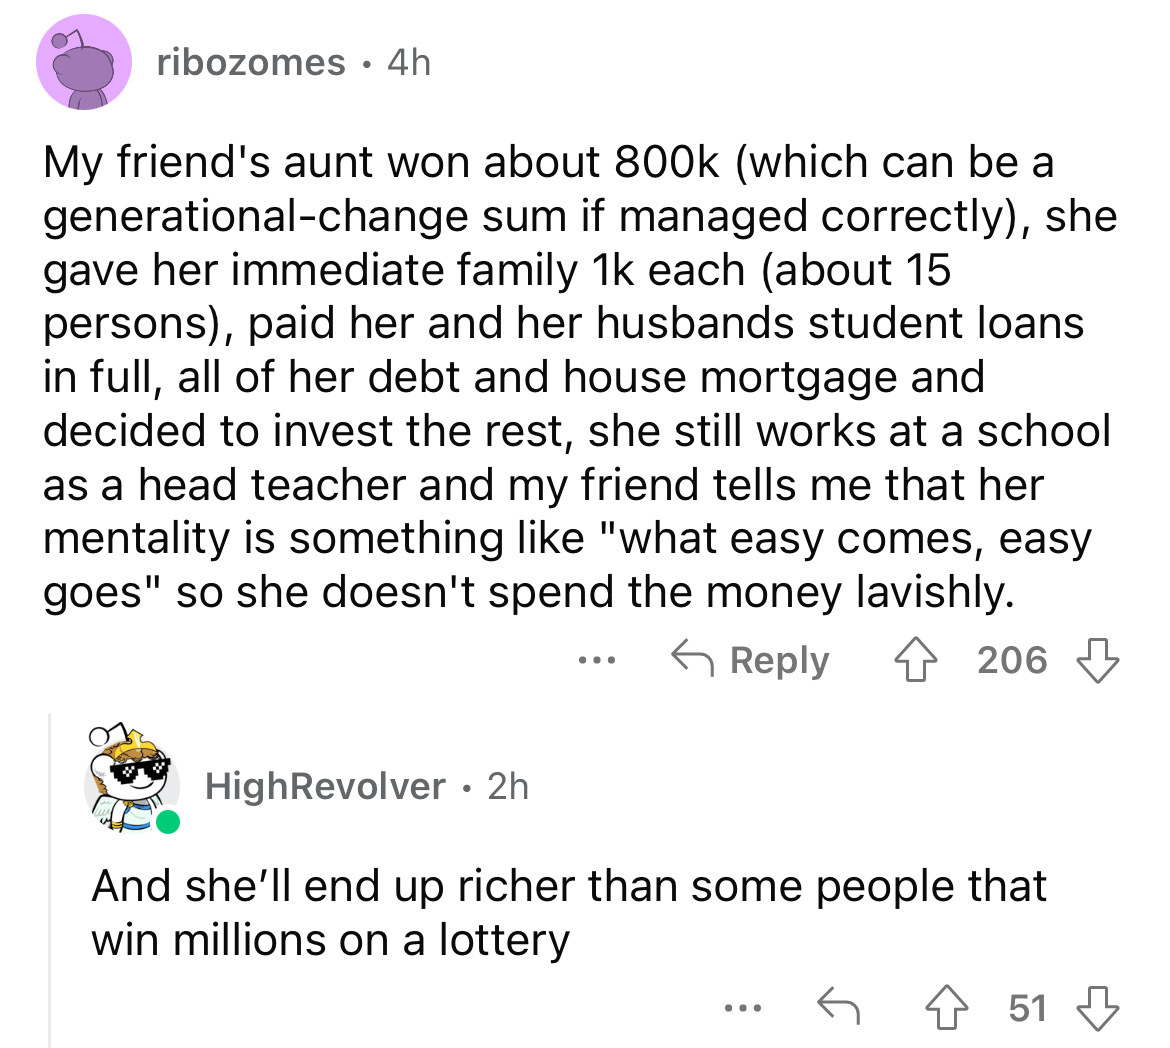 angle - ribozomes 4h My friend's aunt won about which can be a generationalchange sum if managed correctly, she gave her immediate family 1k each about 15 persons, paid her and her husbands student loans in full, all of her debt and house mortgage and dec